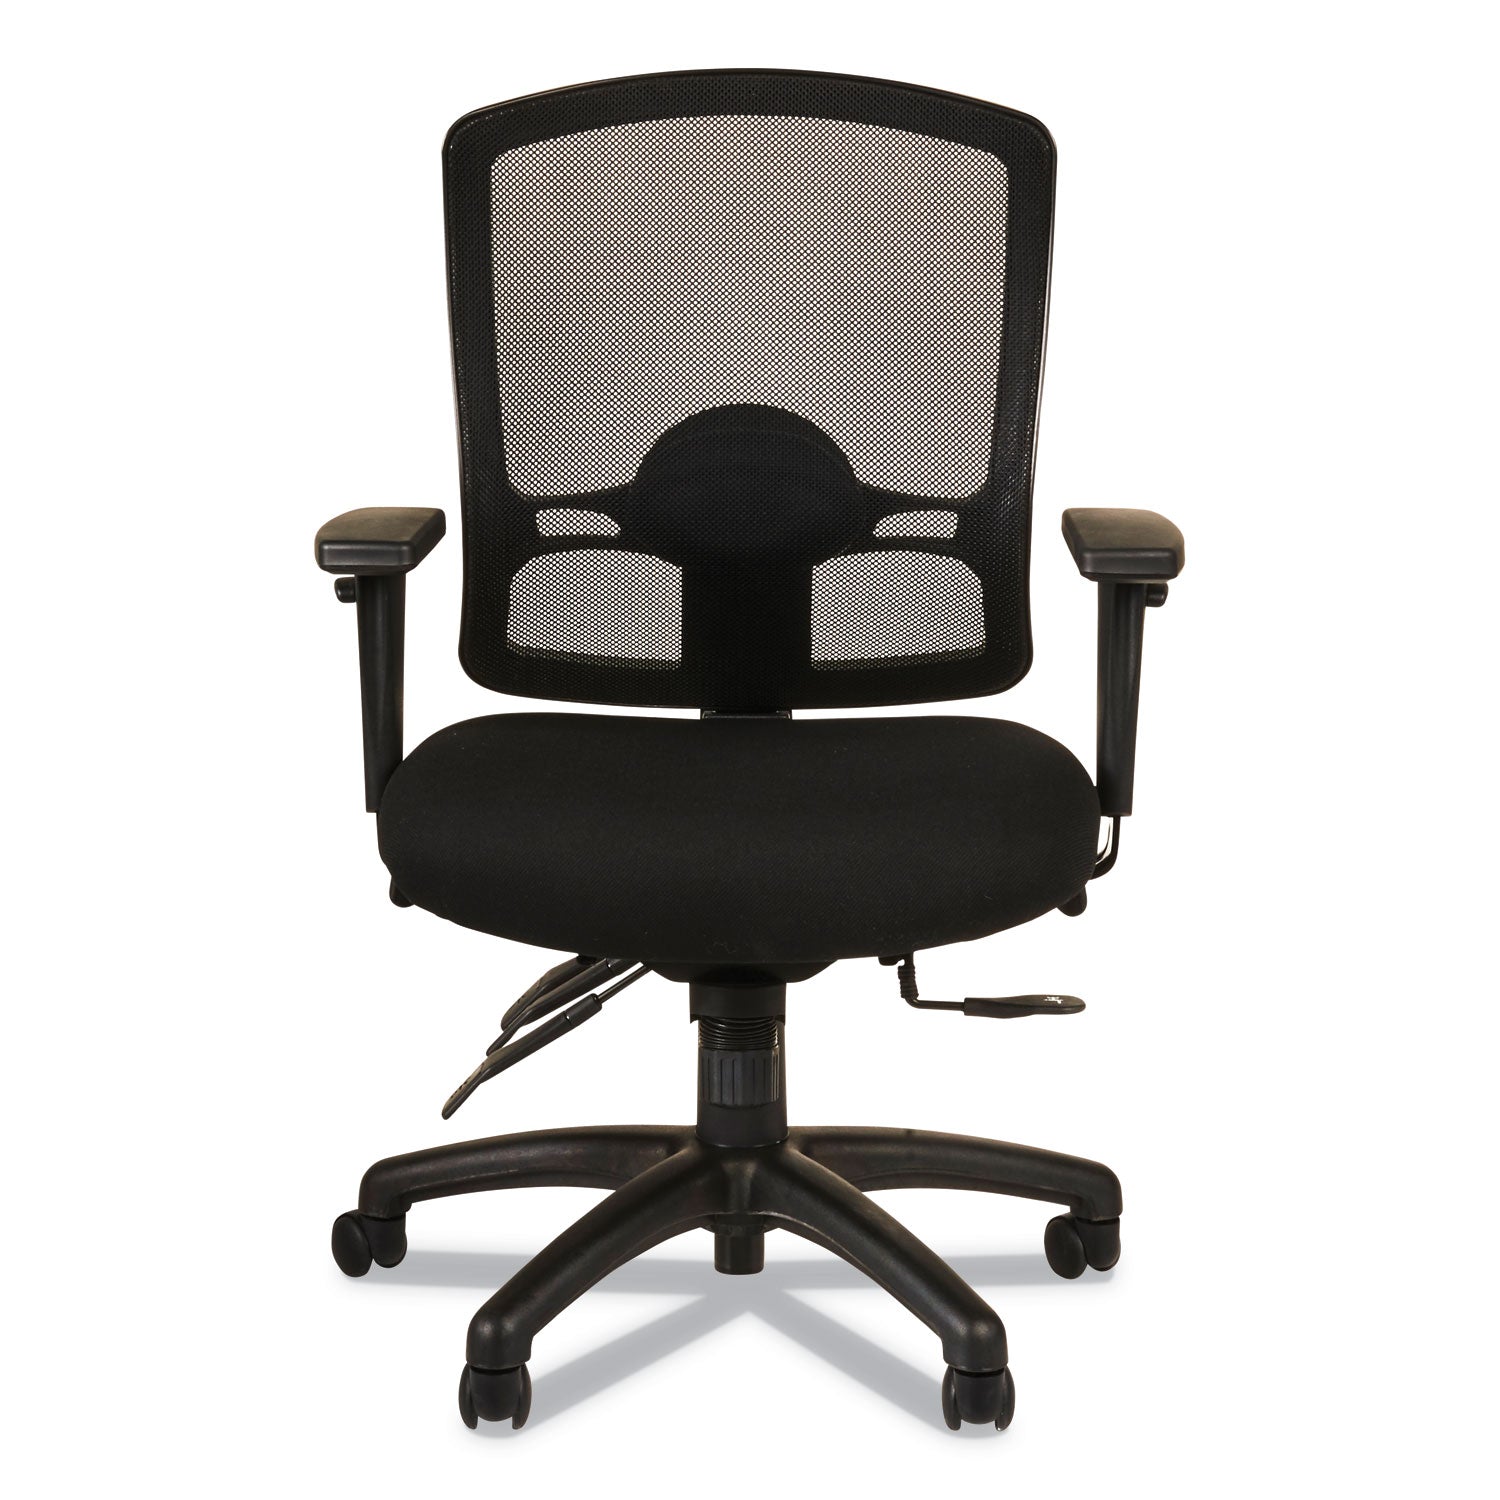 alera-etros-series-mid-back-multifunction-with-seat-slide-chair-supports-up-to-275-lb-1783-to-2145-seat-height-black_aleet4217 - 2